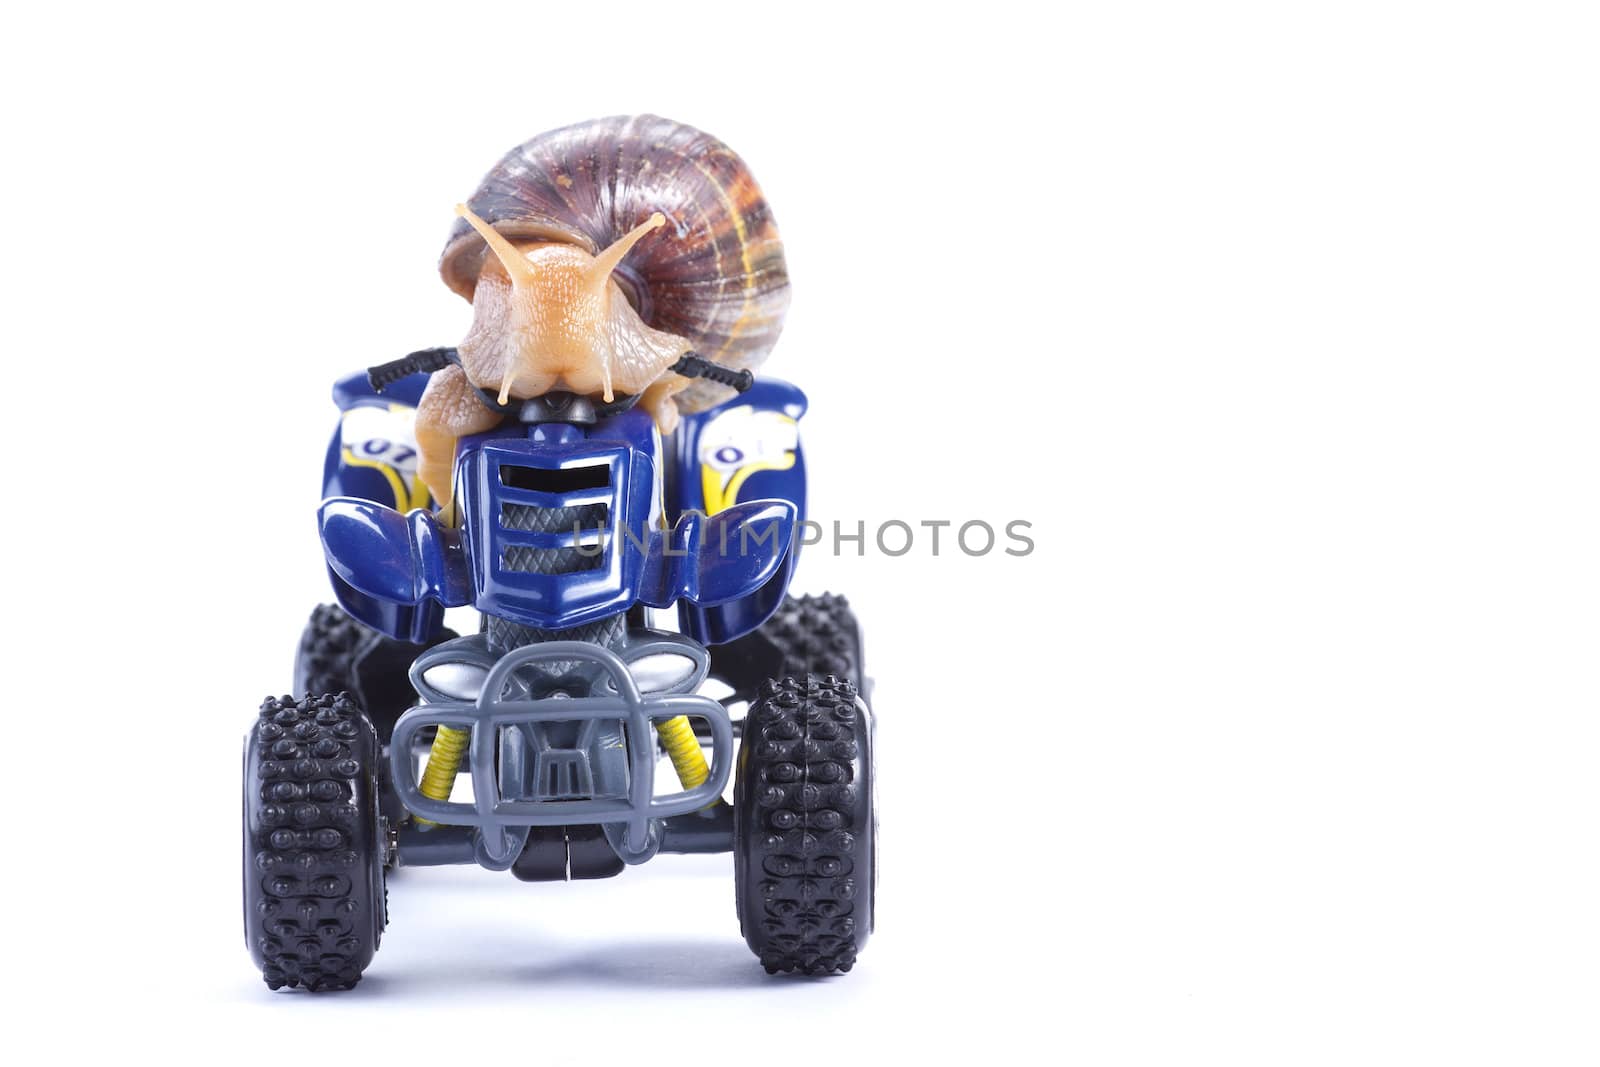 A snail looking at the camera riding a toy quad model